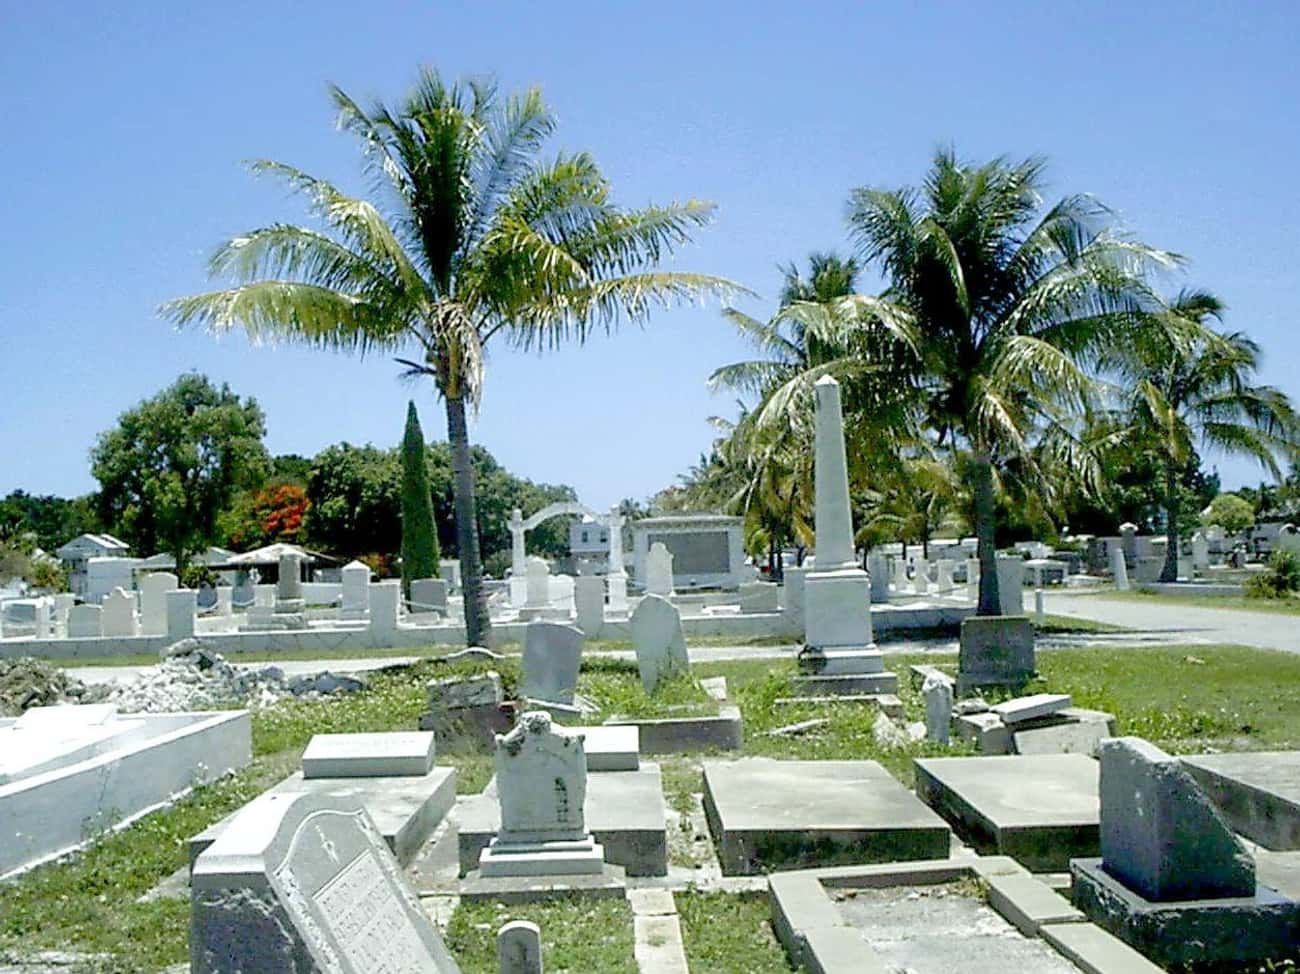 Key West Cemetery, Where Over 100,000 People Are Buried